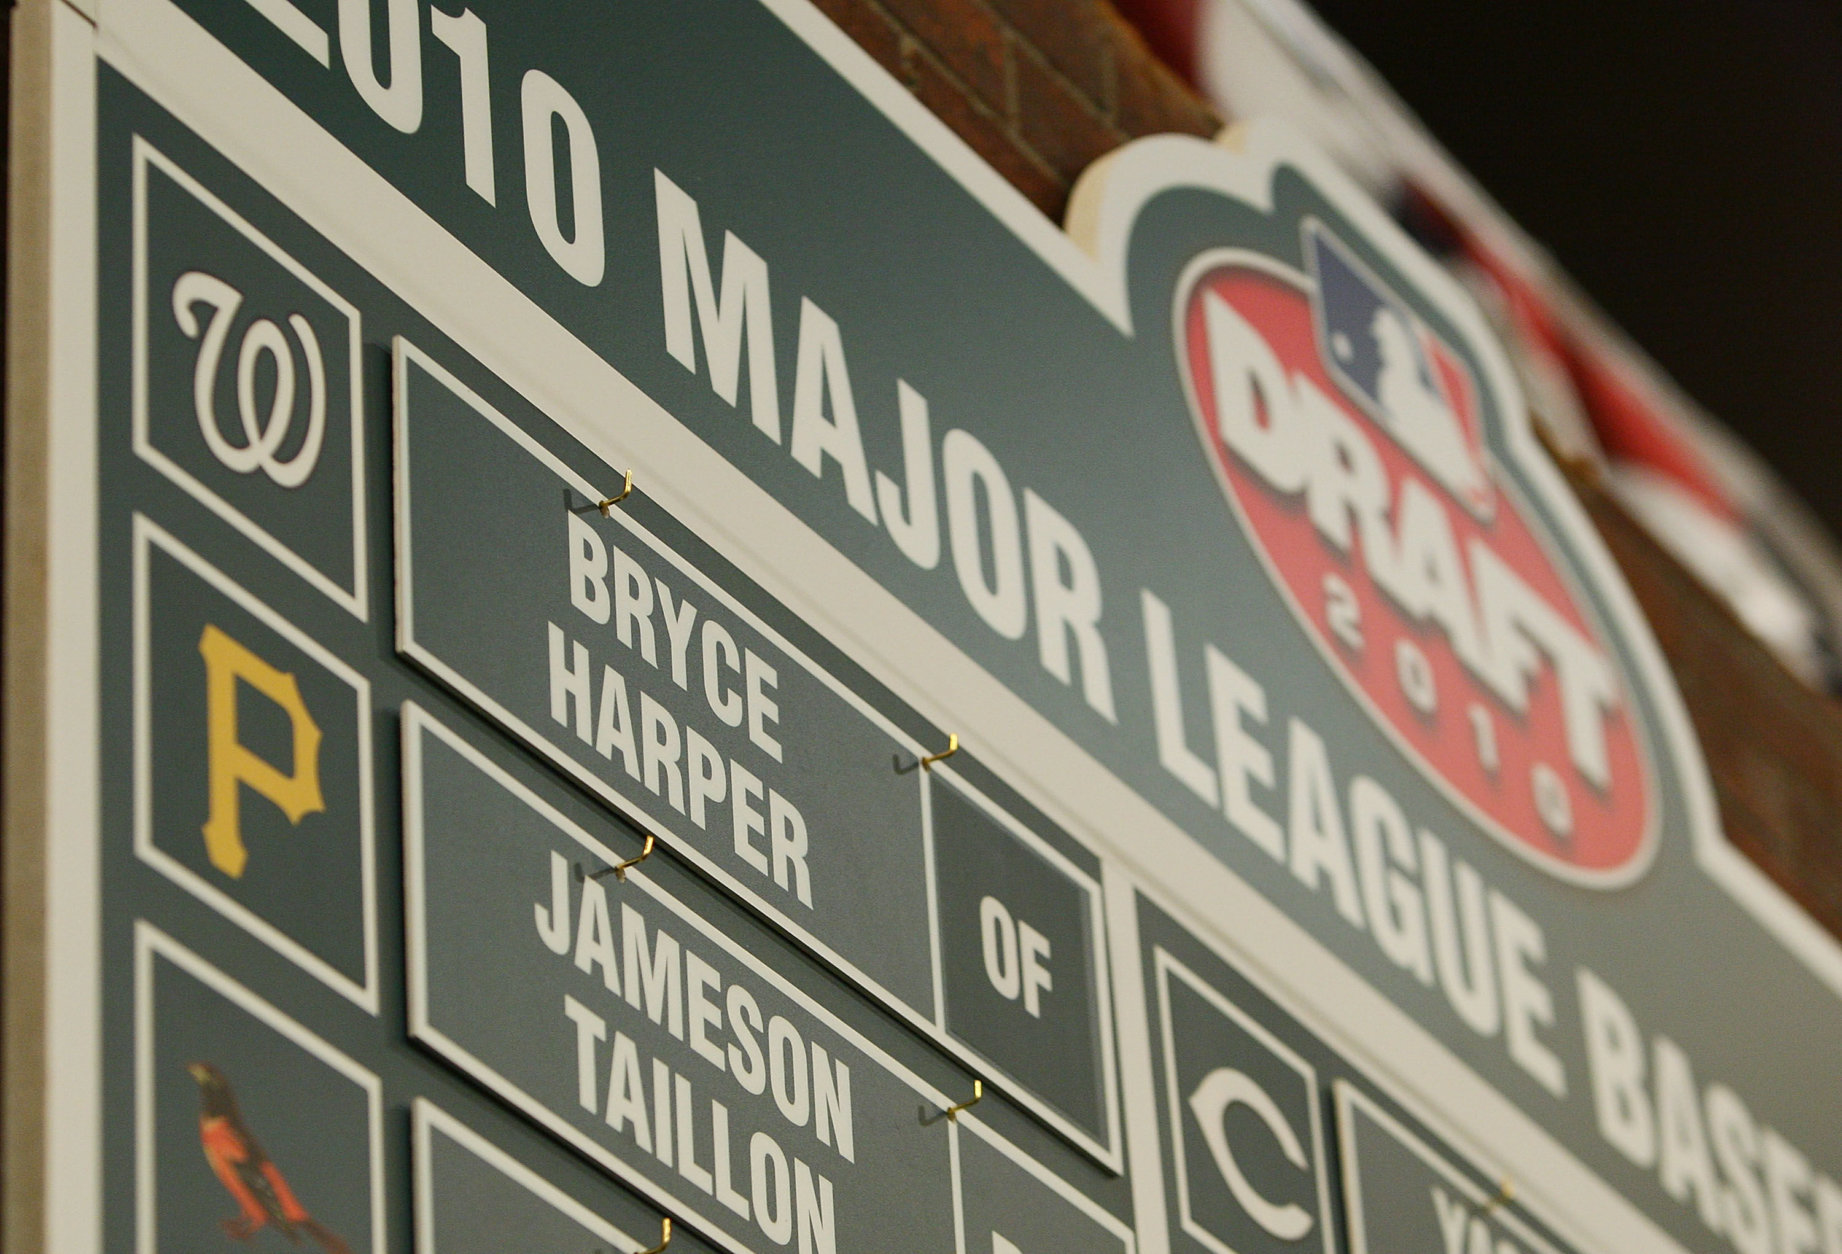 SECAUCUS, NJ - JUNE 07:  A detailed view of the first overall pick of the Washington Nationals Bryce Harper on the draft board during the MLB First Year Player Draft on June 7, 2010 held in Studio 42 at the MLB Network in Secaucus, New Jersey.  (Photo by Mike Stobe/Getty Images)